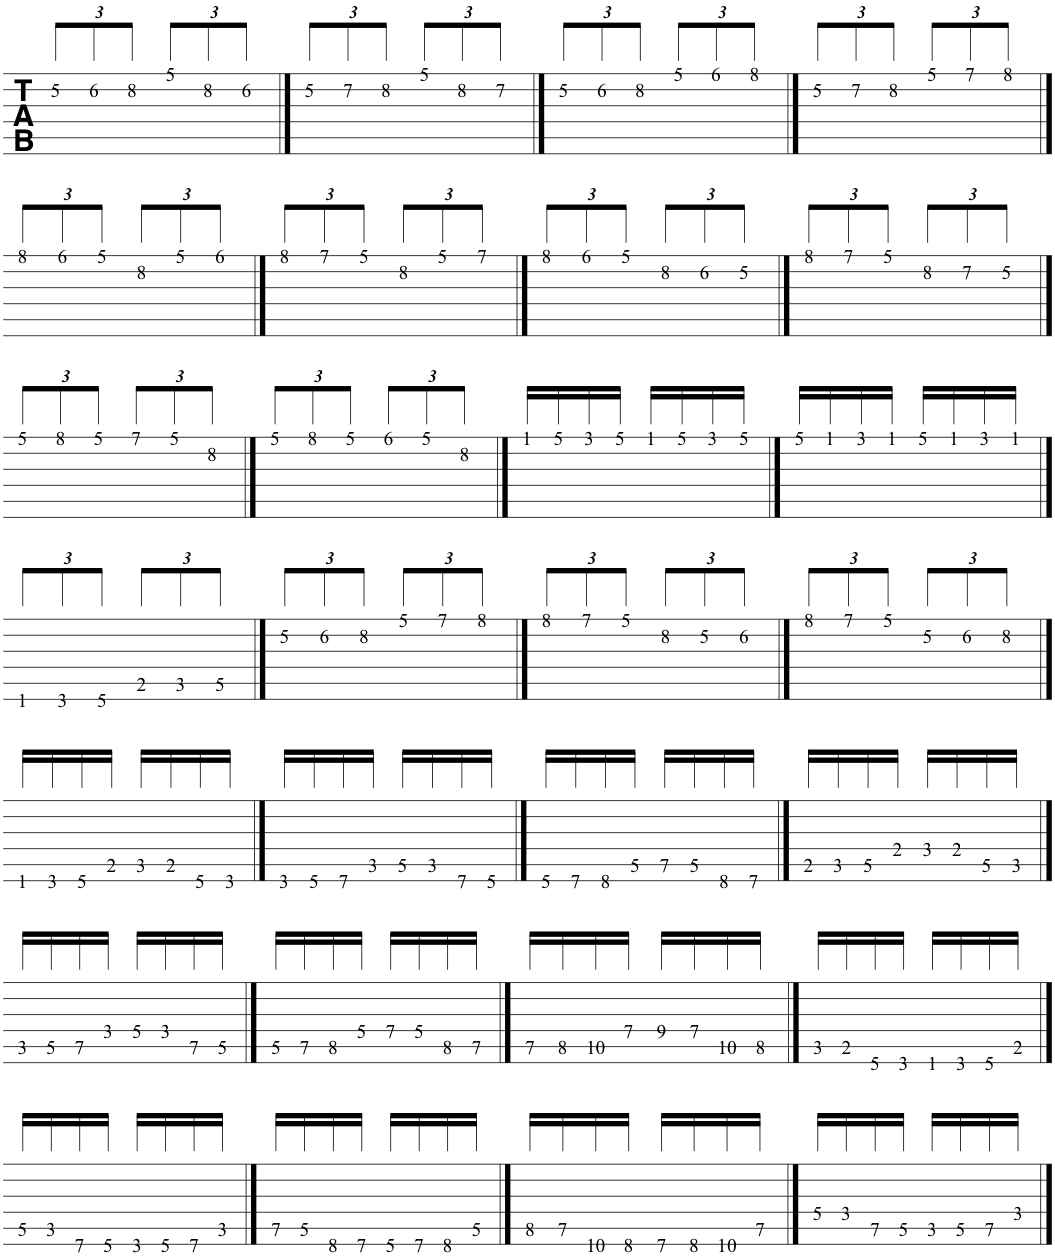 Guitar Technical Exercises 1